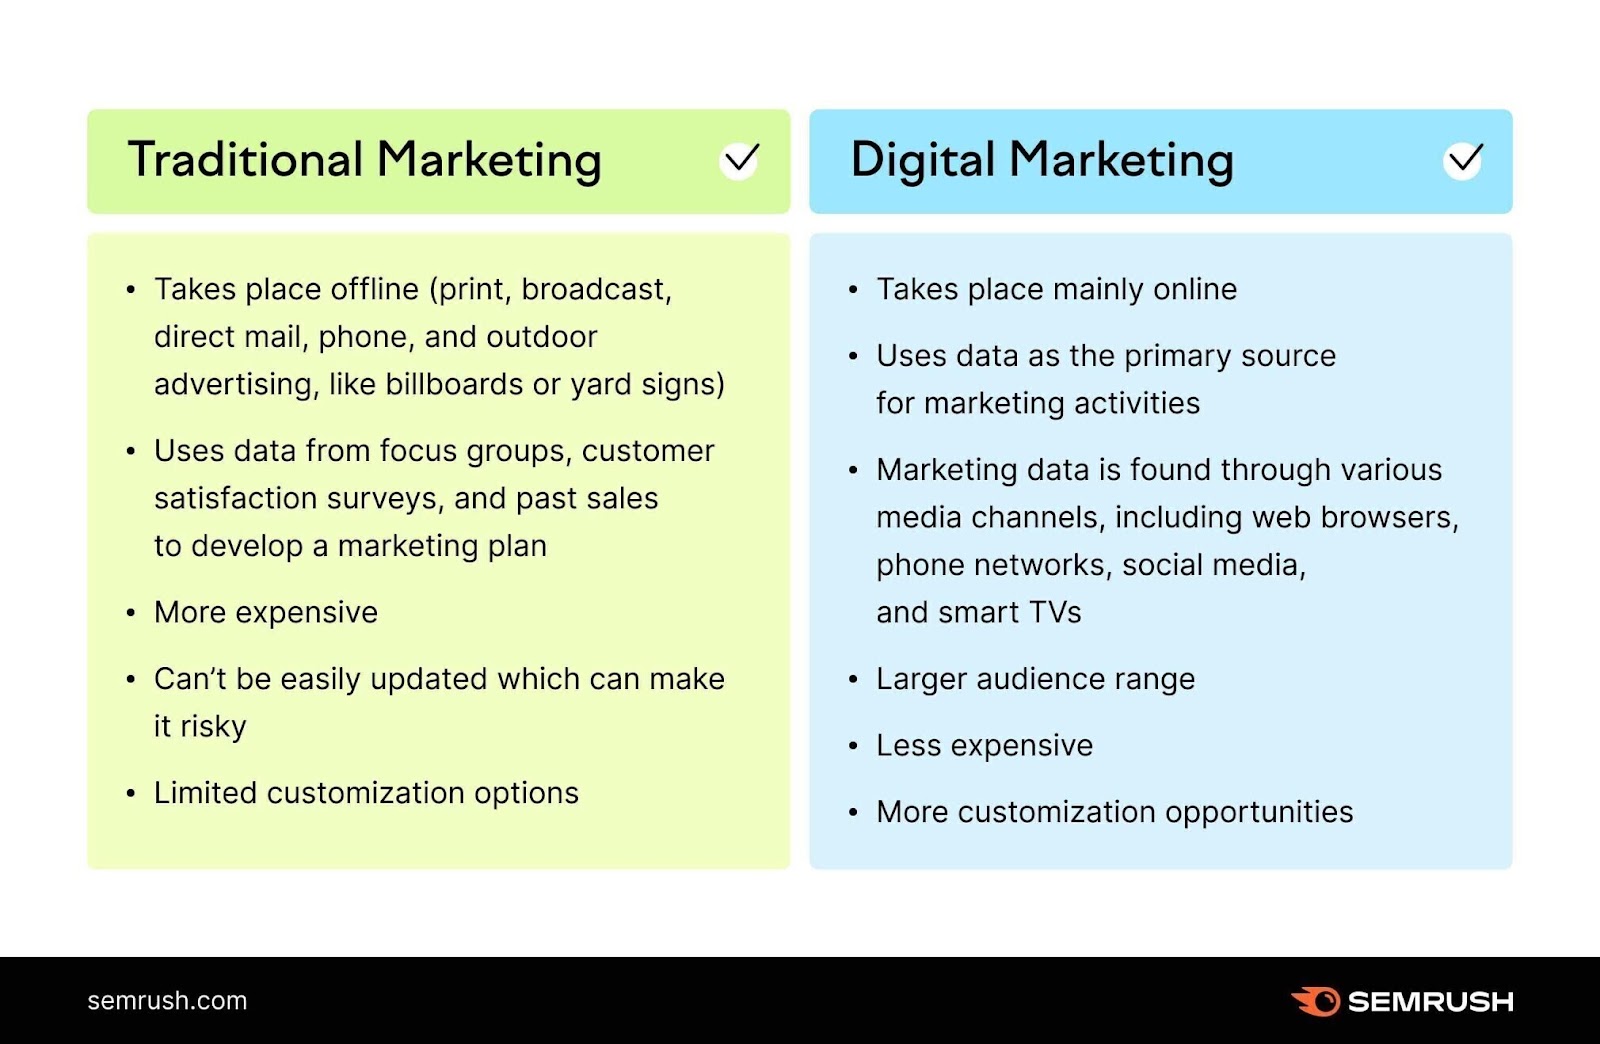 A comparison of traditional and digital marketing